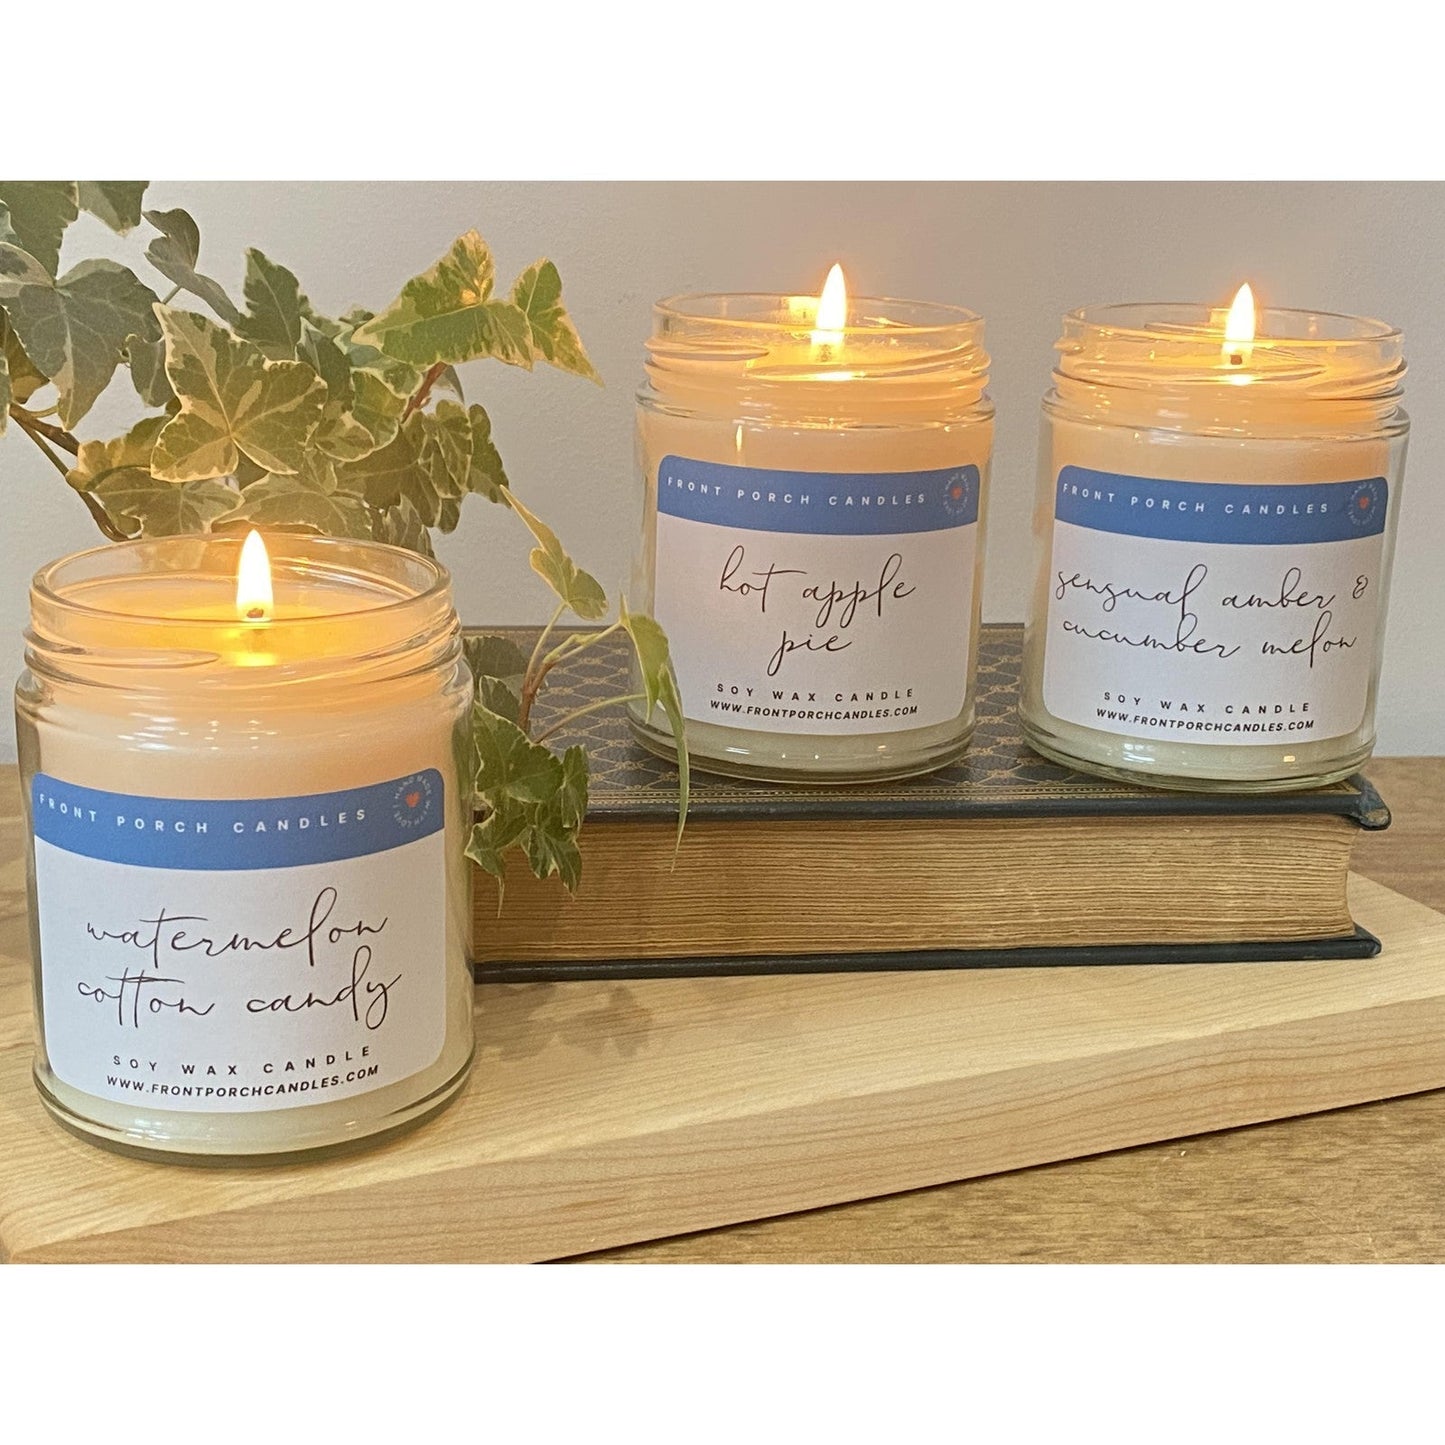 Honeysuckle & Magnolia- Blend of Honeysuckle & Magnolia.Enjoy our beautiful and aromatic Soy Candles. Made with 100% Soy Wax and our Strong Fragrance Oils (candles may come in contact with other waxes in our facility). The color of the candle will vary in shades of white and yellow. Candles are approx. 8 fluid ounces each.BURNING INSTRUCTIONS:Keep wick centered and trimmed to 1/4" at all times- (never leave unattended and watch flame- if flame is getting higher- extinguish immediately and trim the wick). Ke